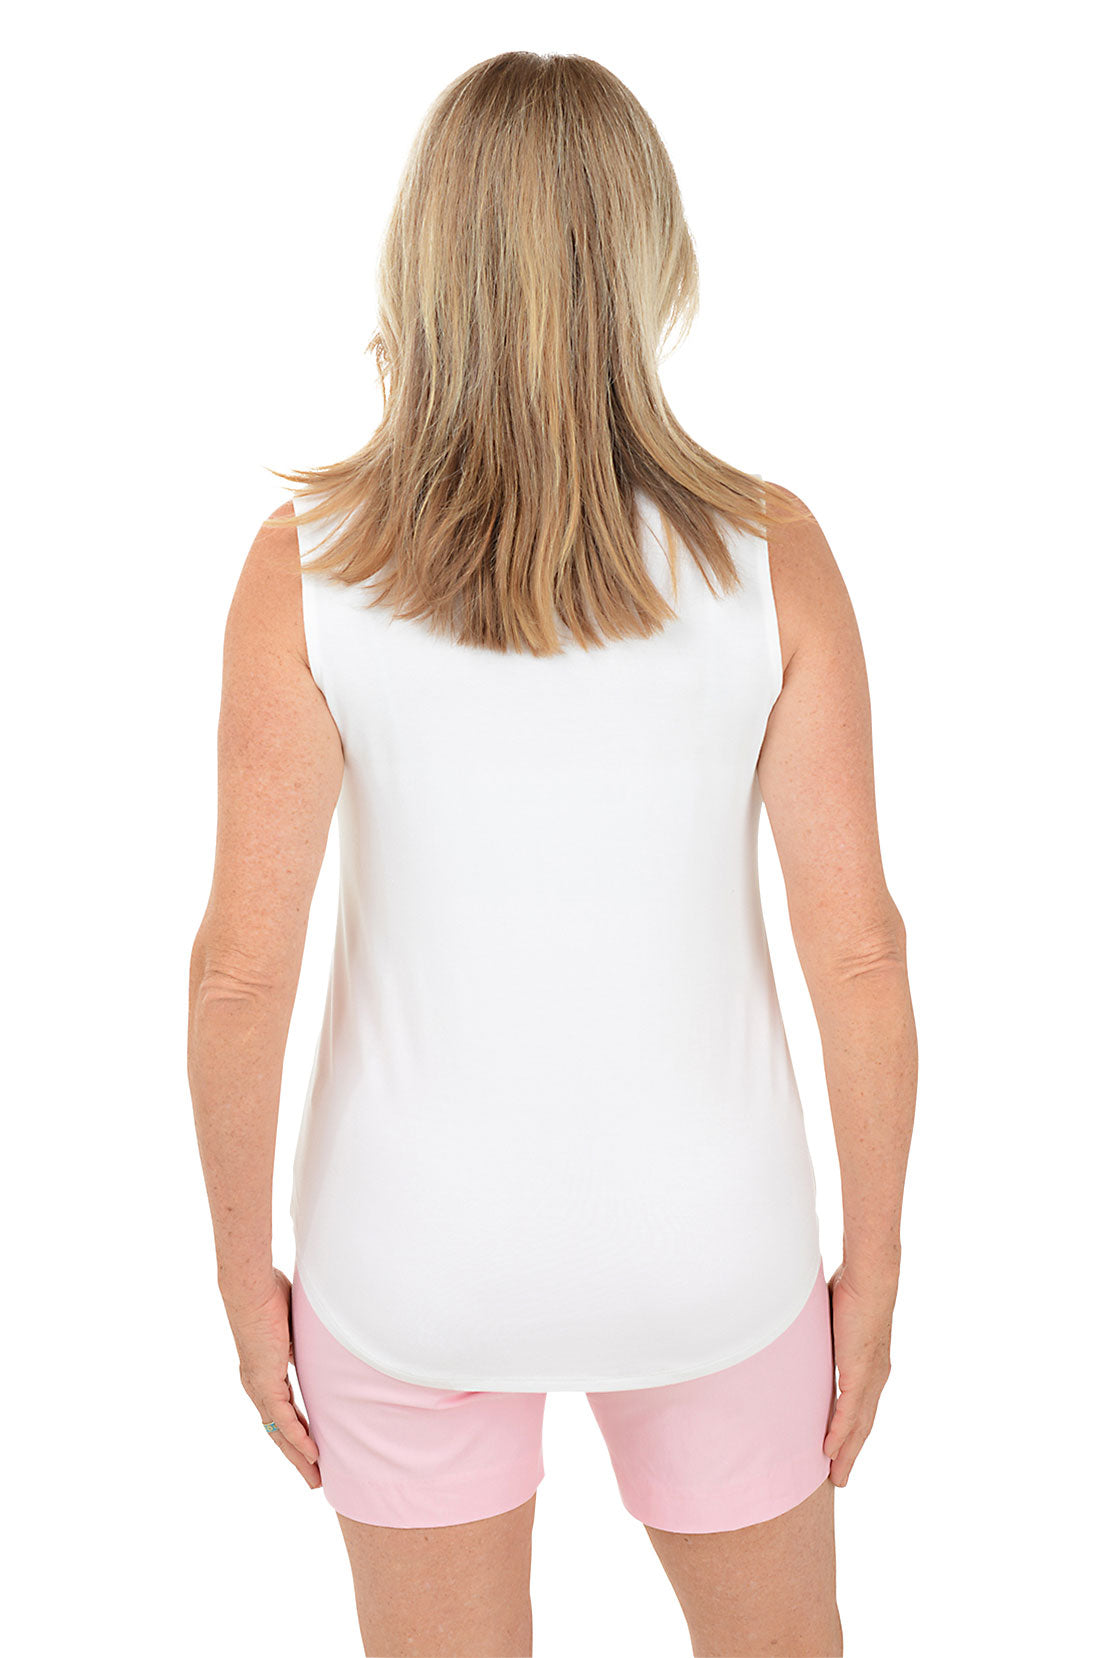 Inverted Pleat Sleeveless Knit Top